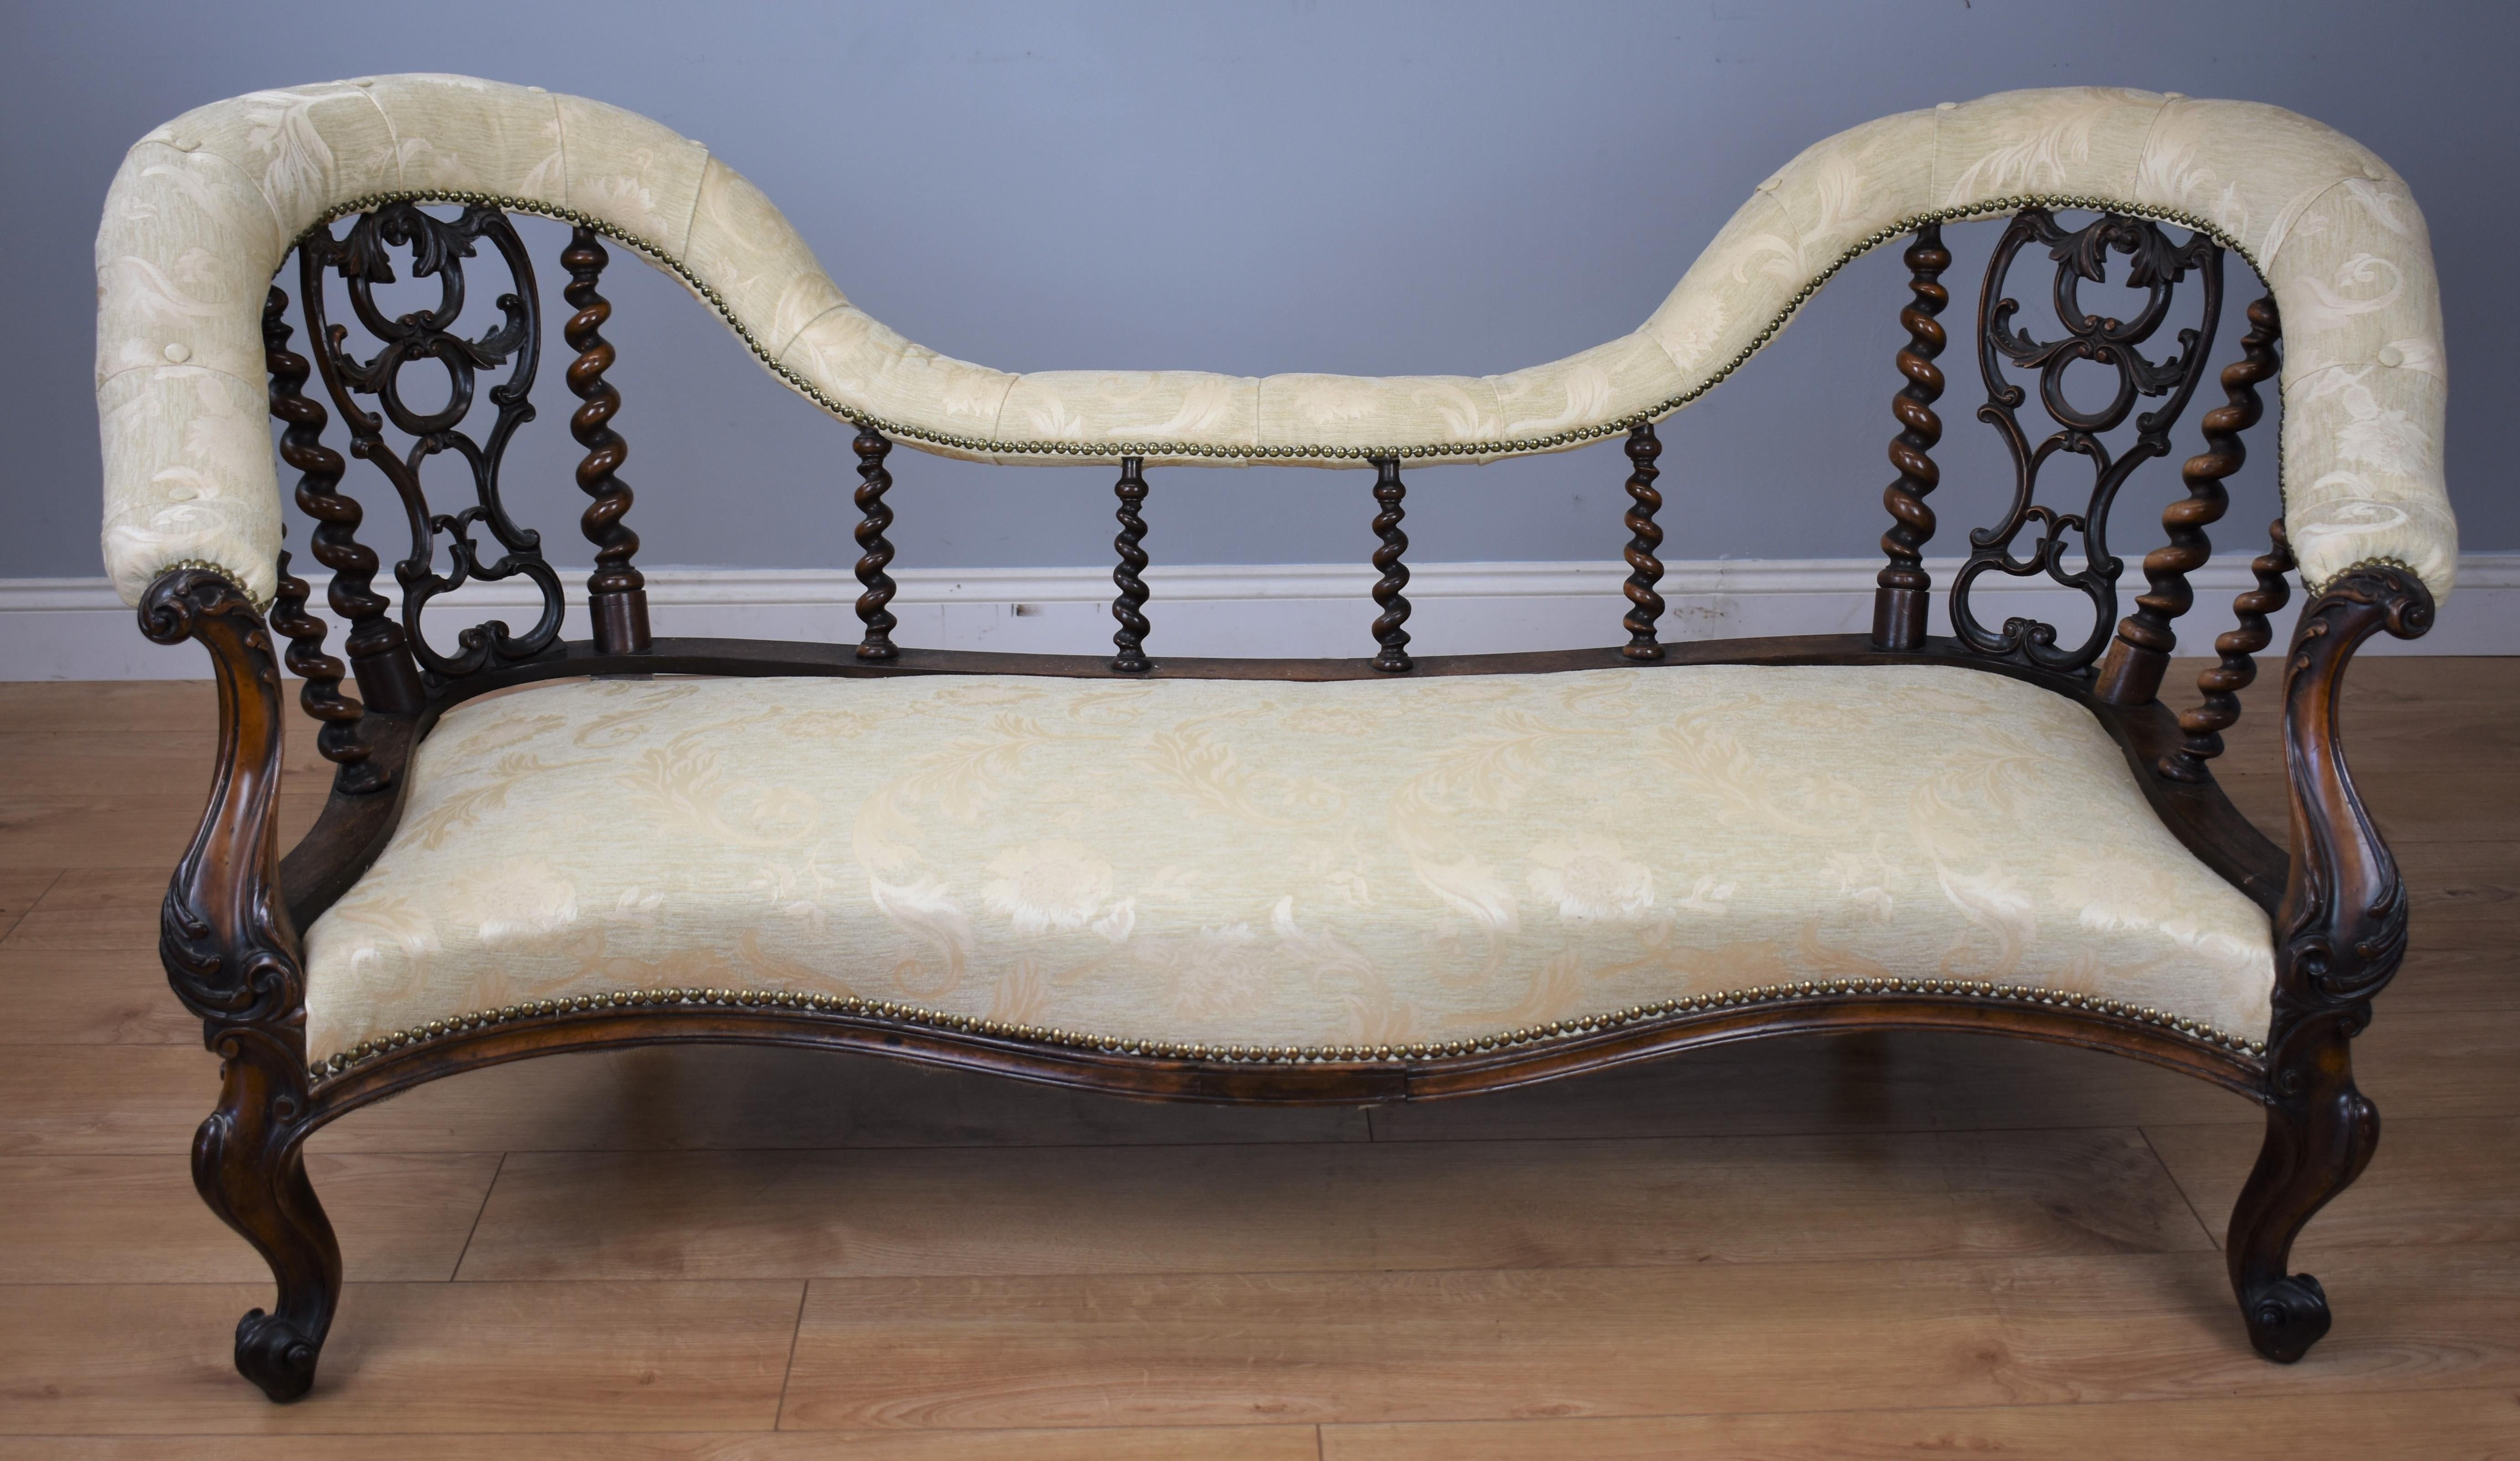 For sale is a Victorian rosewood chaise lounge in good condition having been recently upholstered and covered in a floral cream fabric with antique brass studs to the edge, the pair arched backs with pierced scrolling splats and barley twist